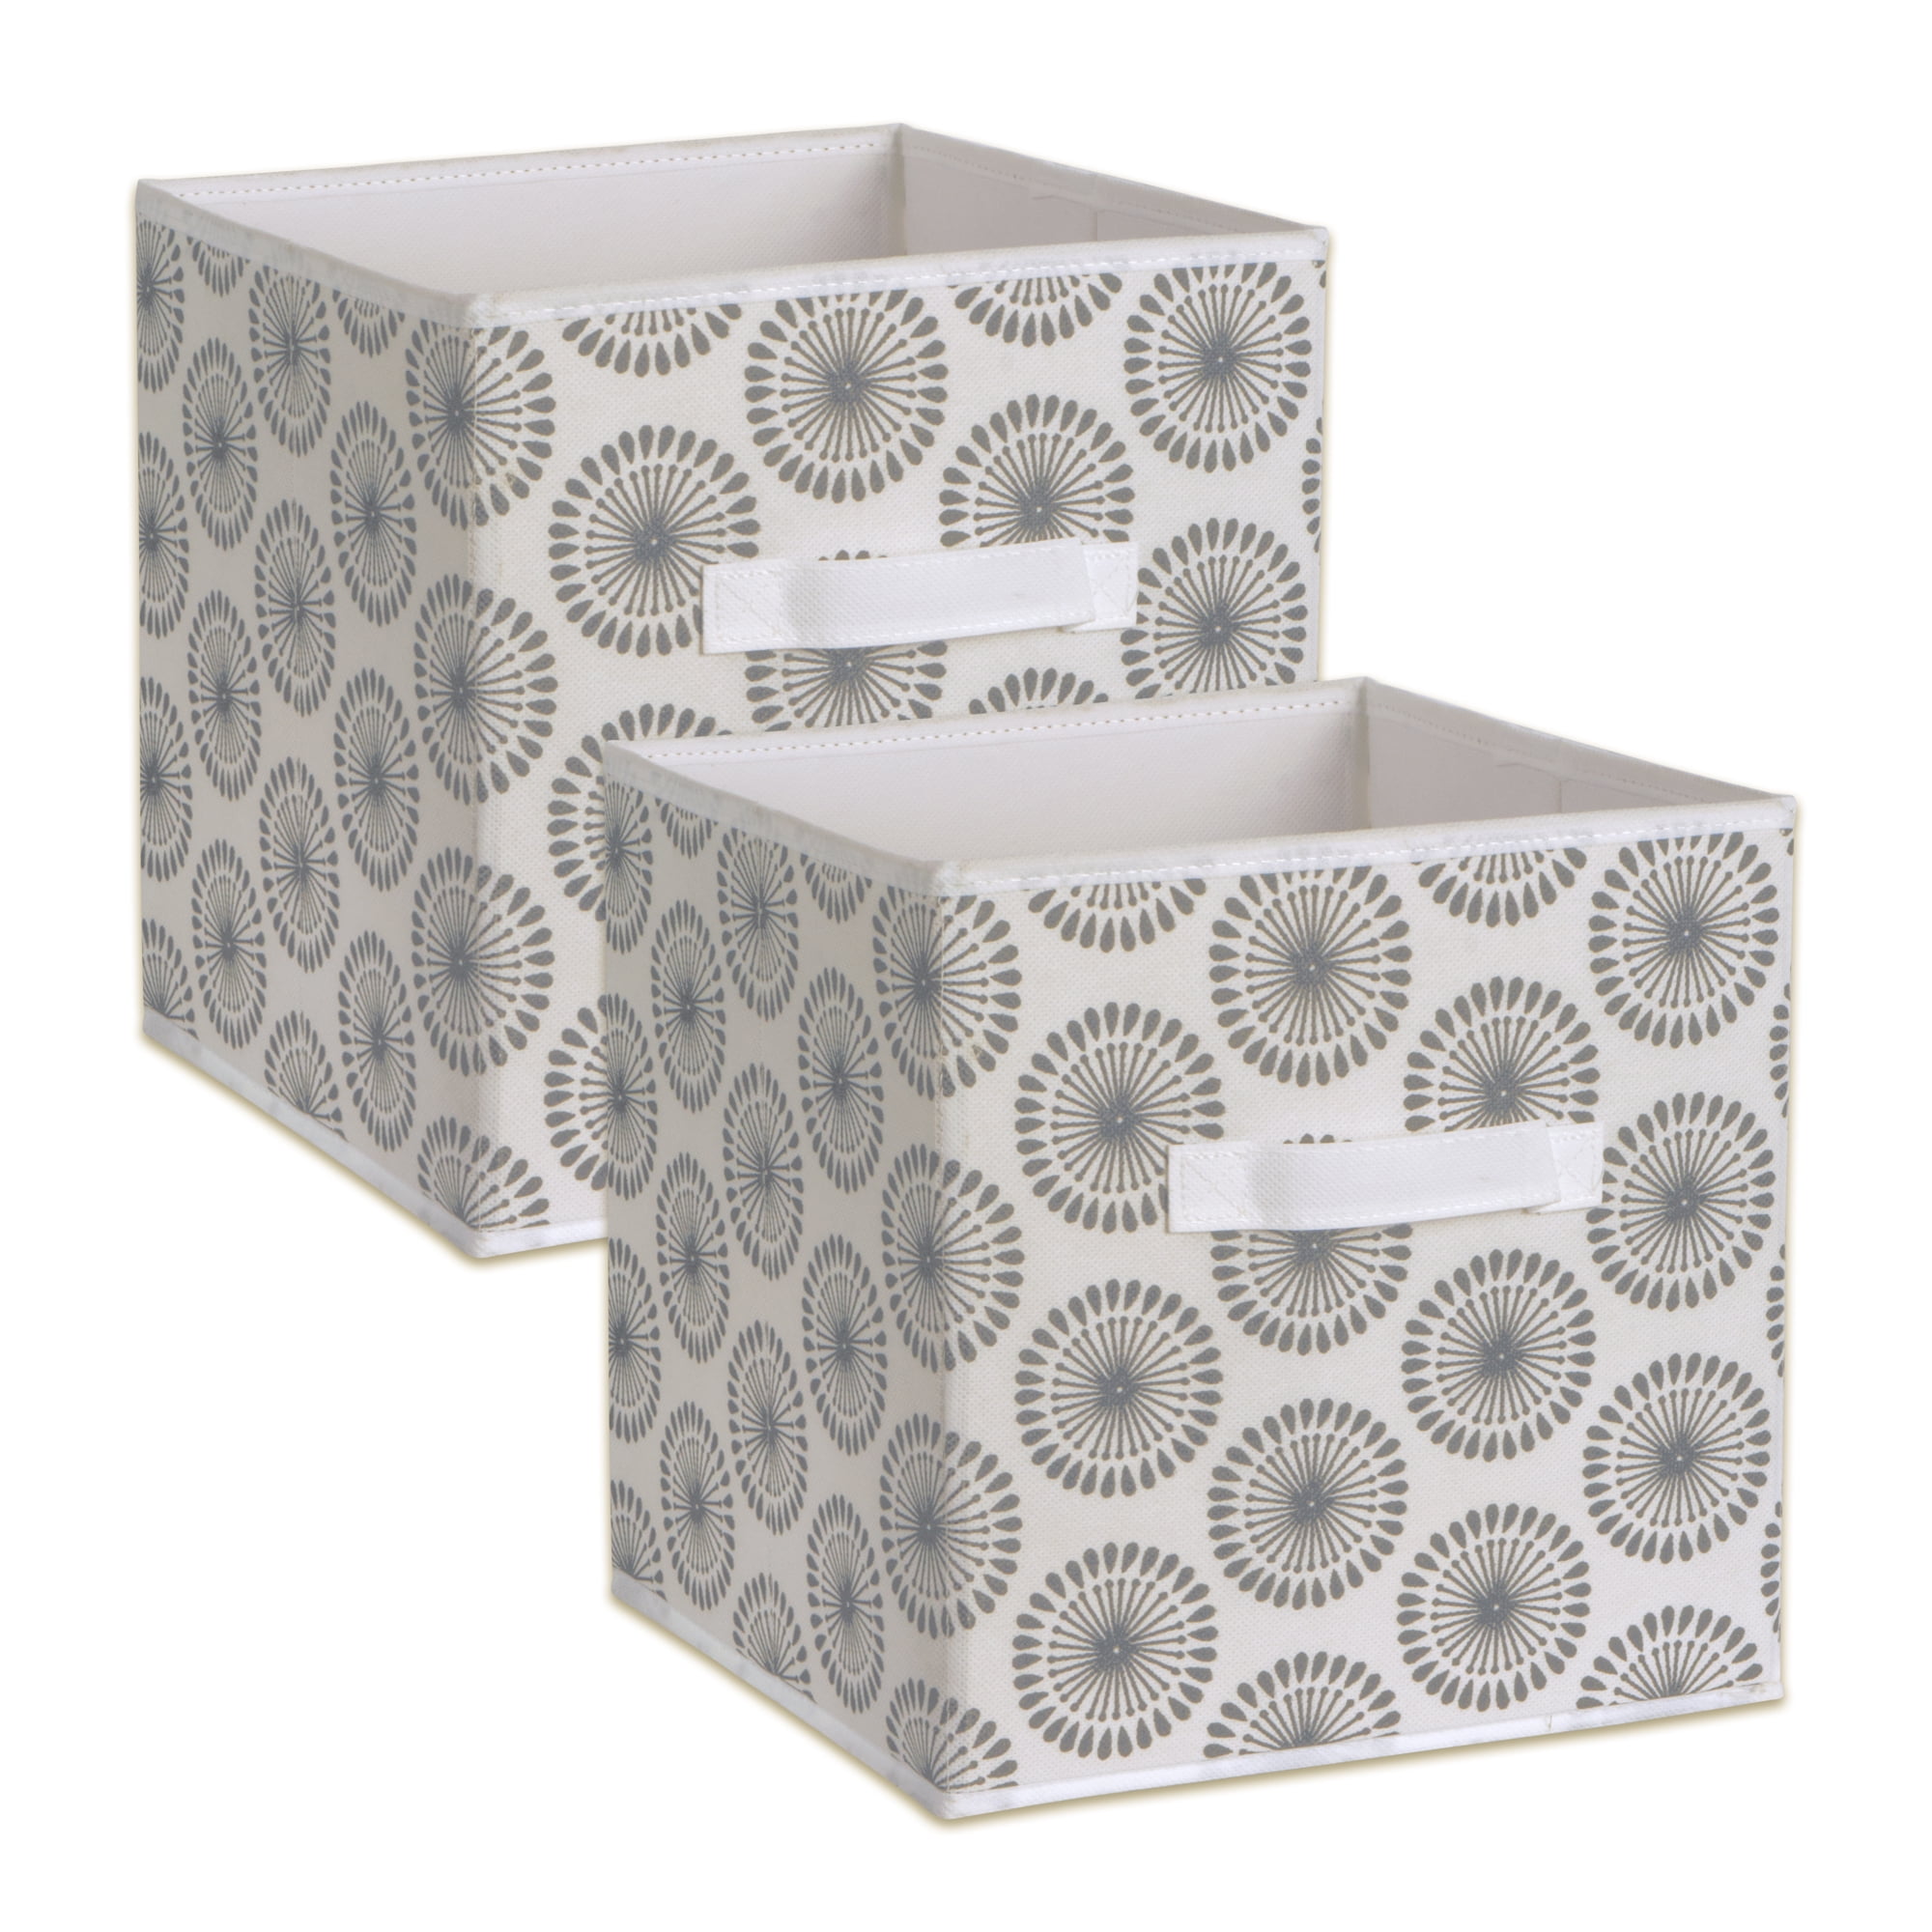 Design Imports Camz35077 11 X 11 X 11 In. Nonwoven Starburst Square Polyester Storage Cube, Grey - Set Of 2